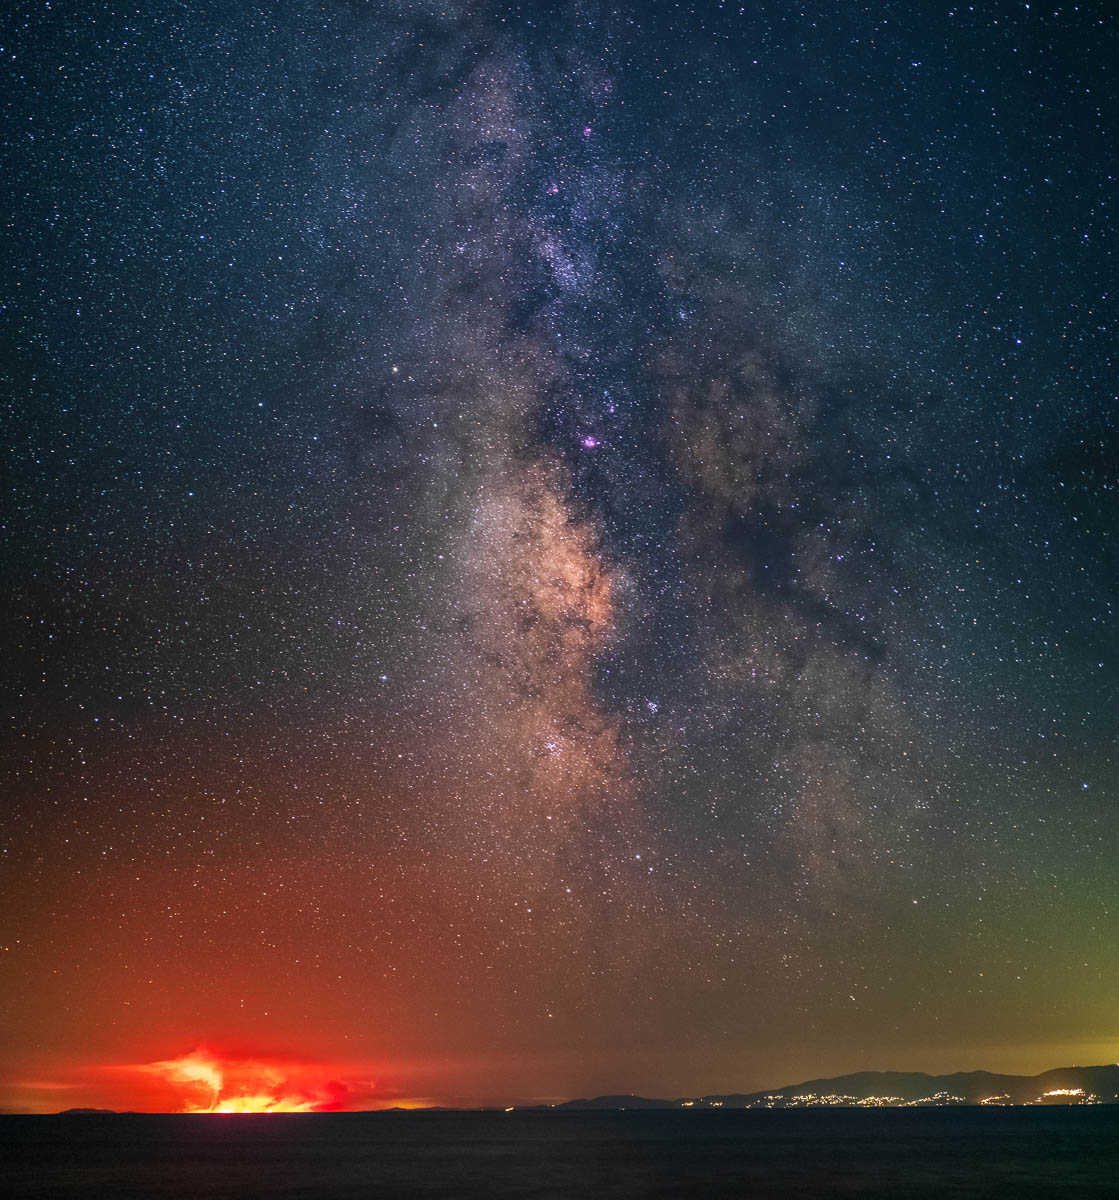 The Wildfires in Evia and the Milky Way